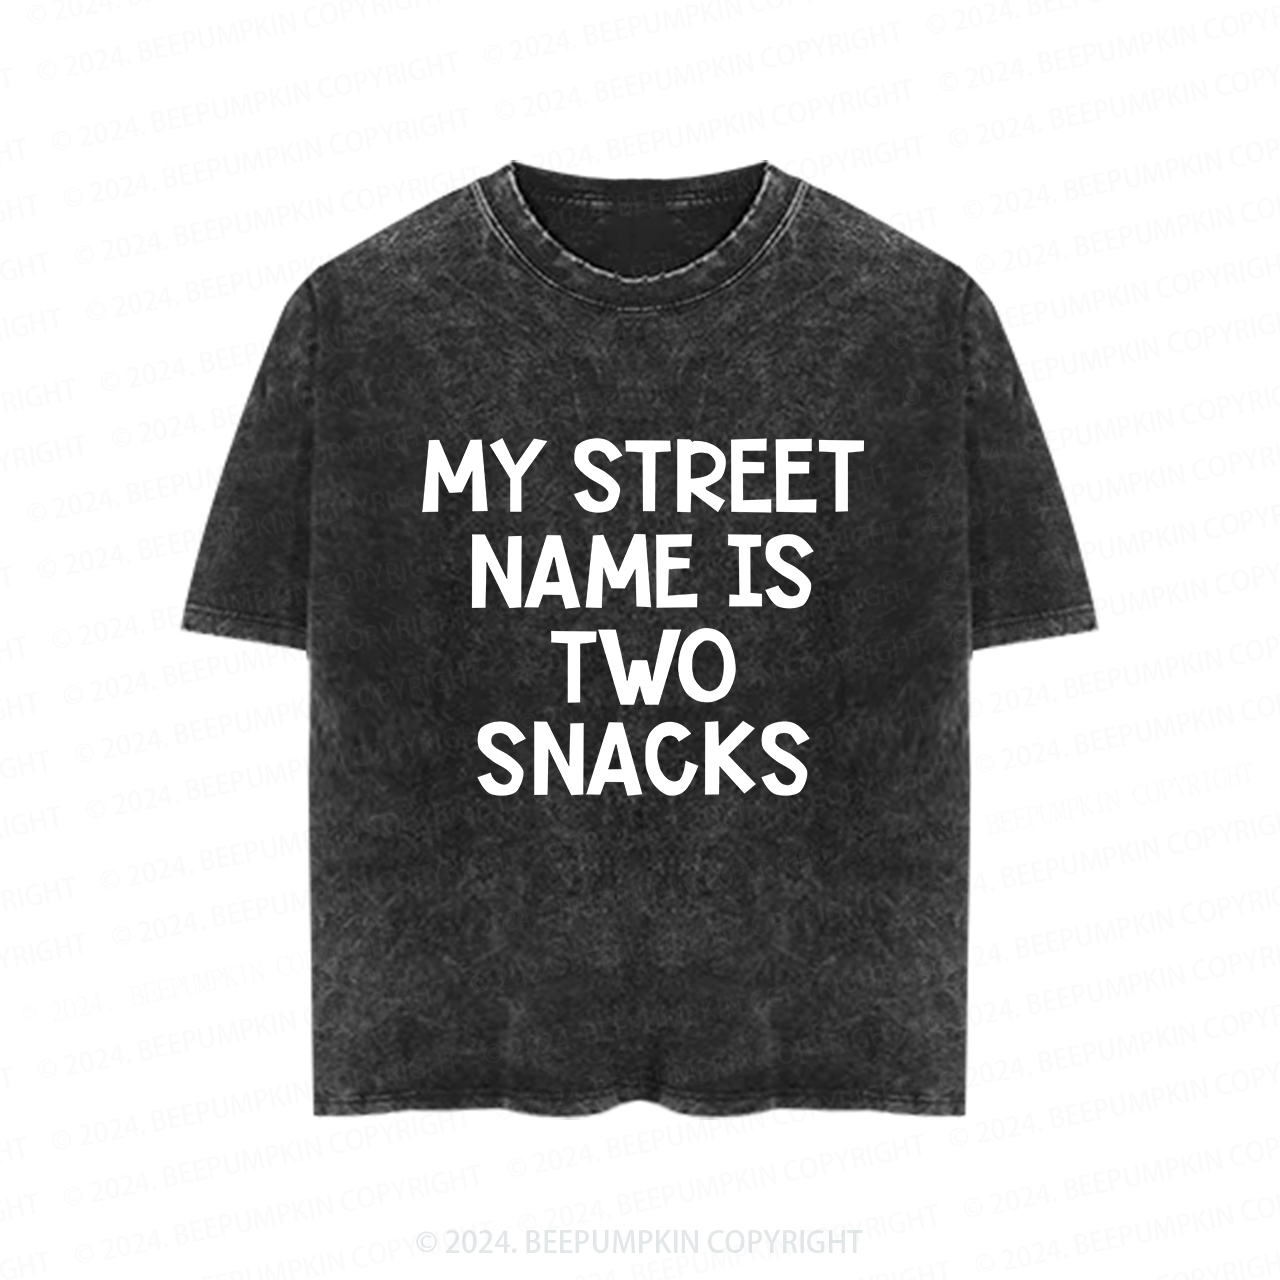 My Street Name Is Two Snacks Kids Shirt Toddler&Kids Washed Tees